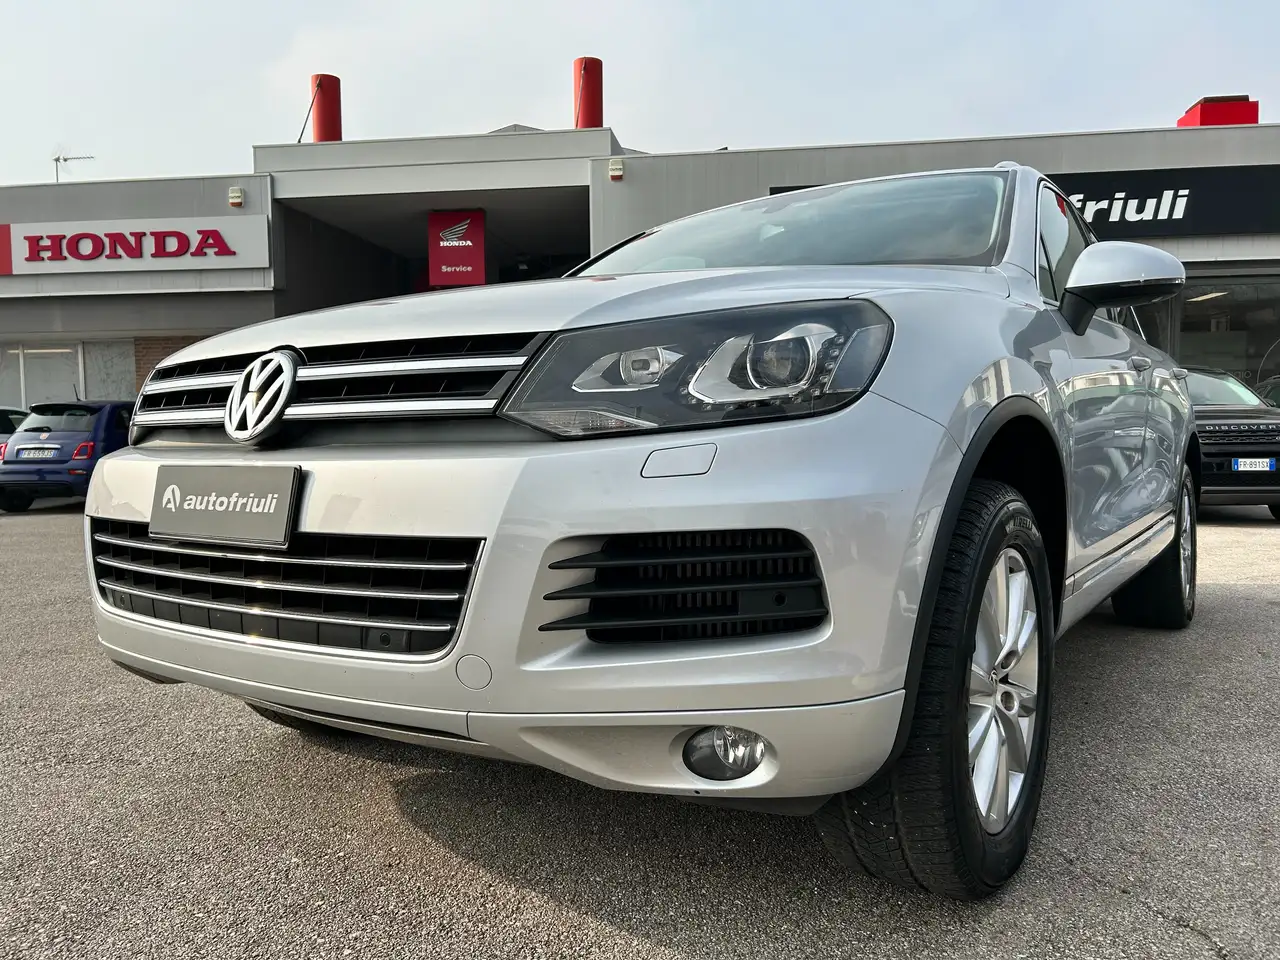 Buy Volkswagen Touareg from Germany, used Volkswagen Touareg for sale with  mileage on mobile.de, autoscout24 in English